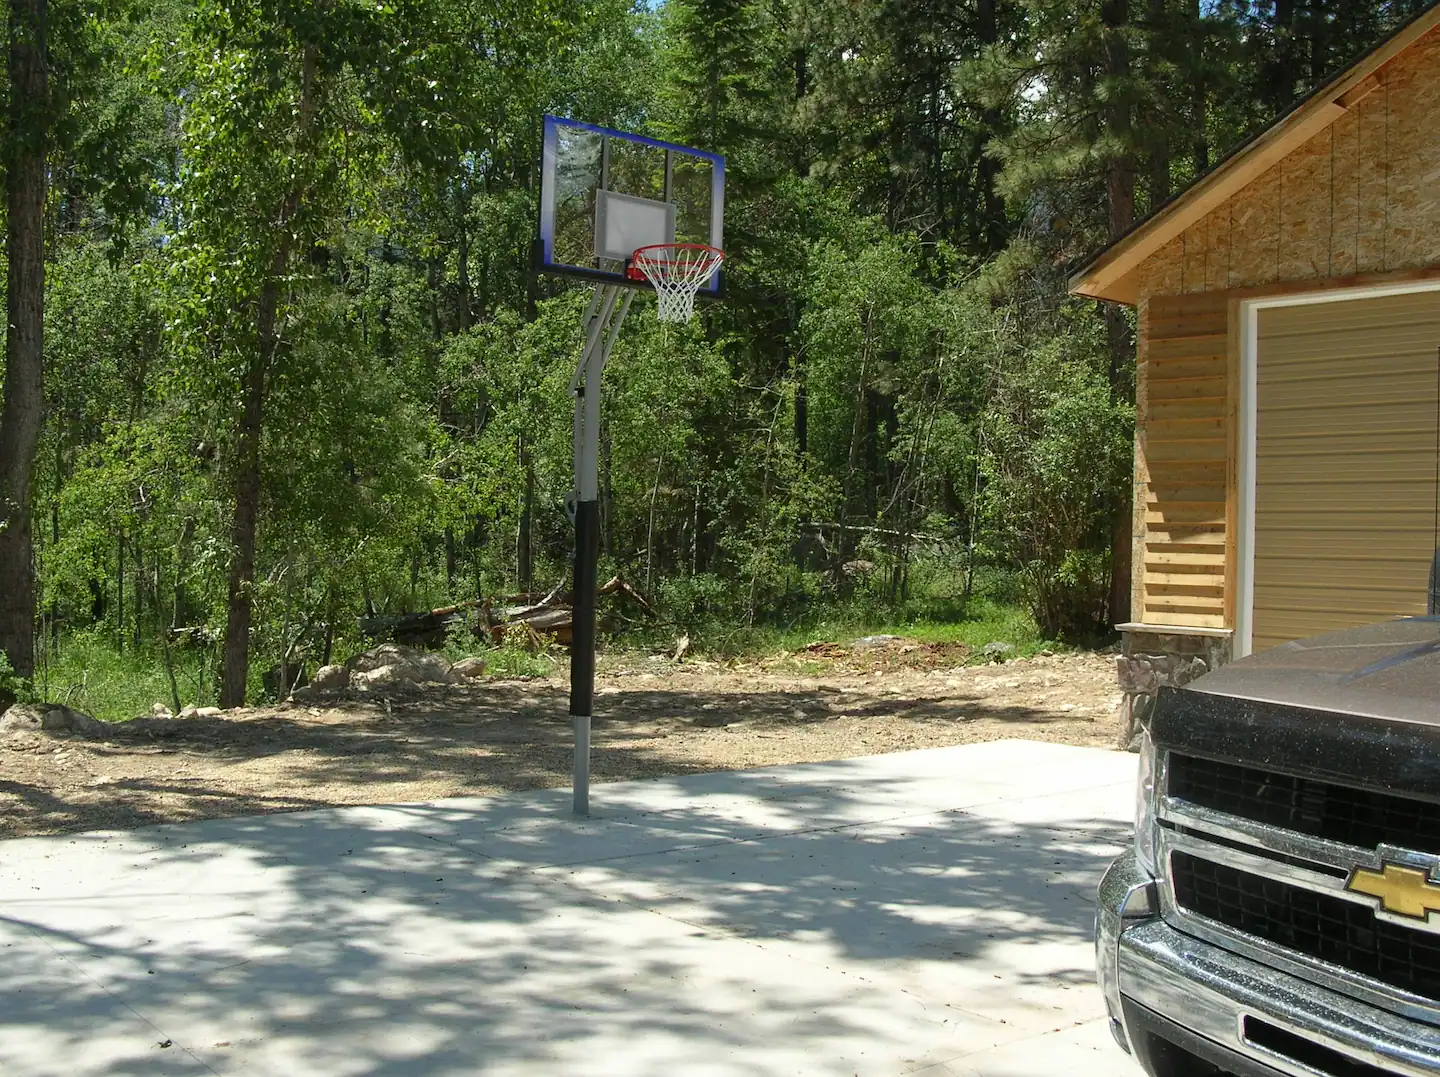 Enjoy a game of basketball on the court.